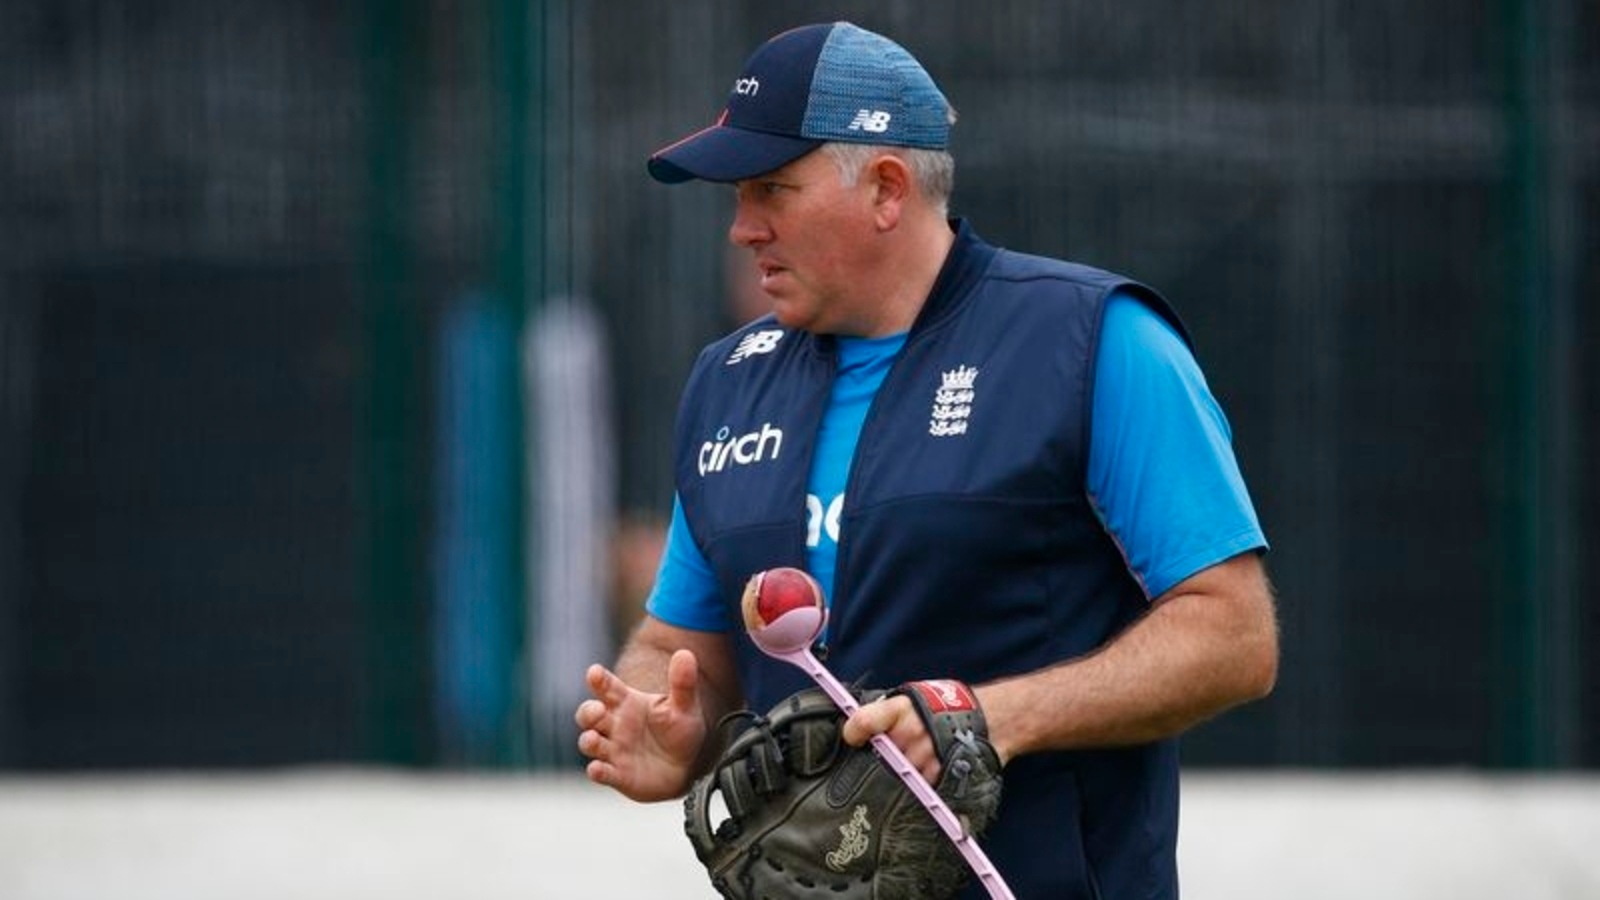 Chris Silverwood: Ex-England head coach takes charge of Sri Lanka on  two-year contract, Cricket News